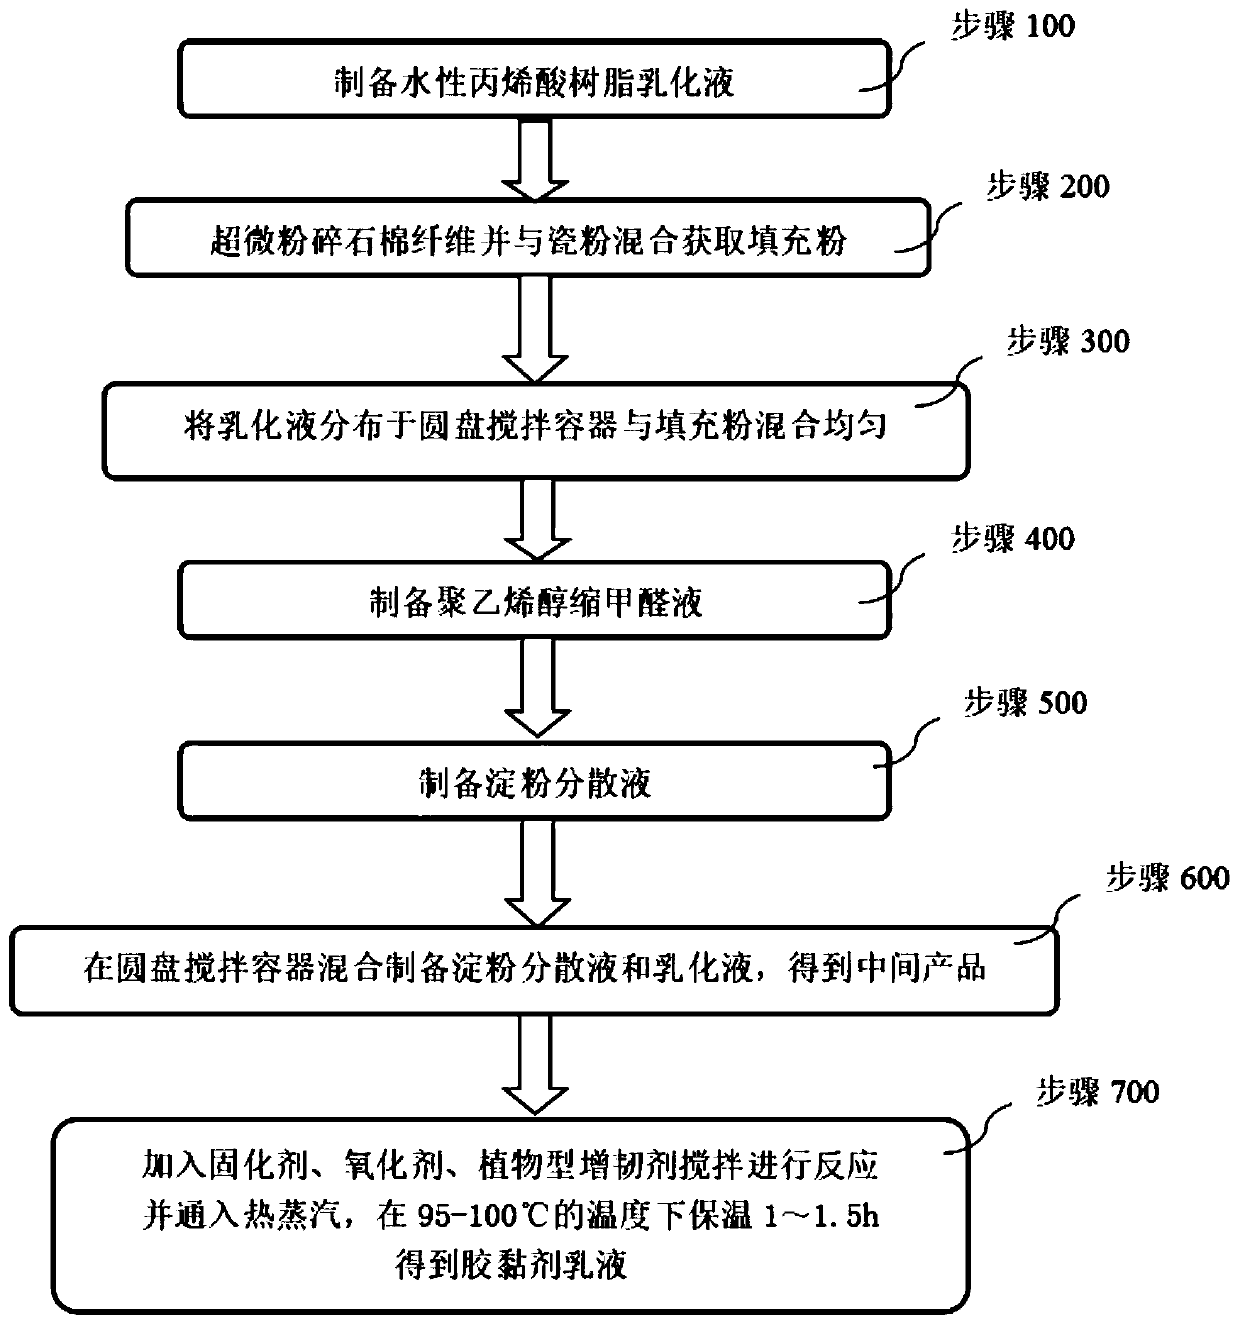 Adhesive for packaging and preparation method of adhesive